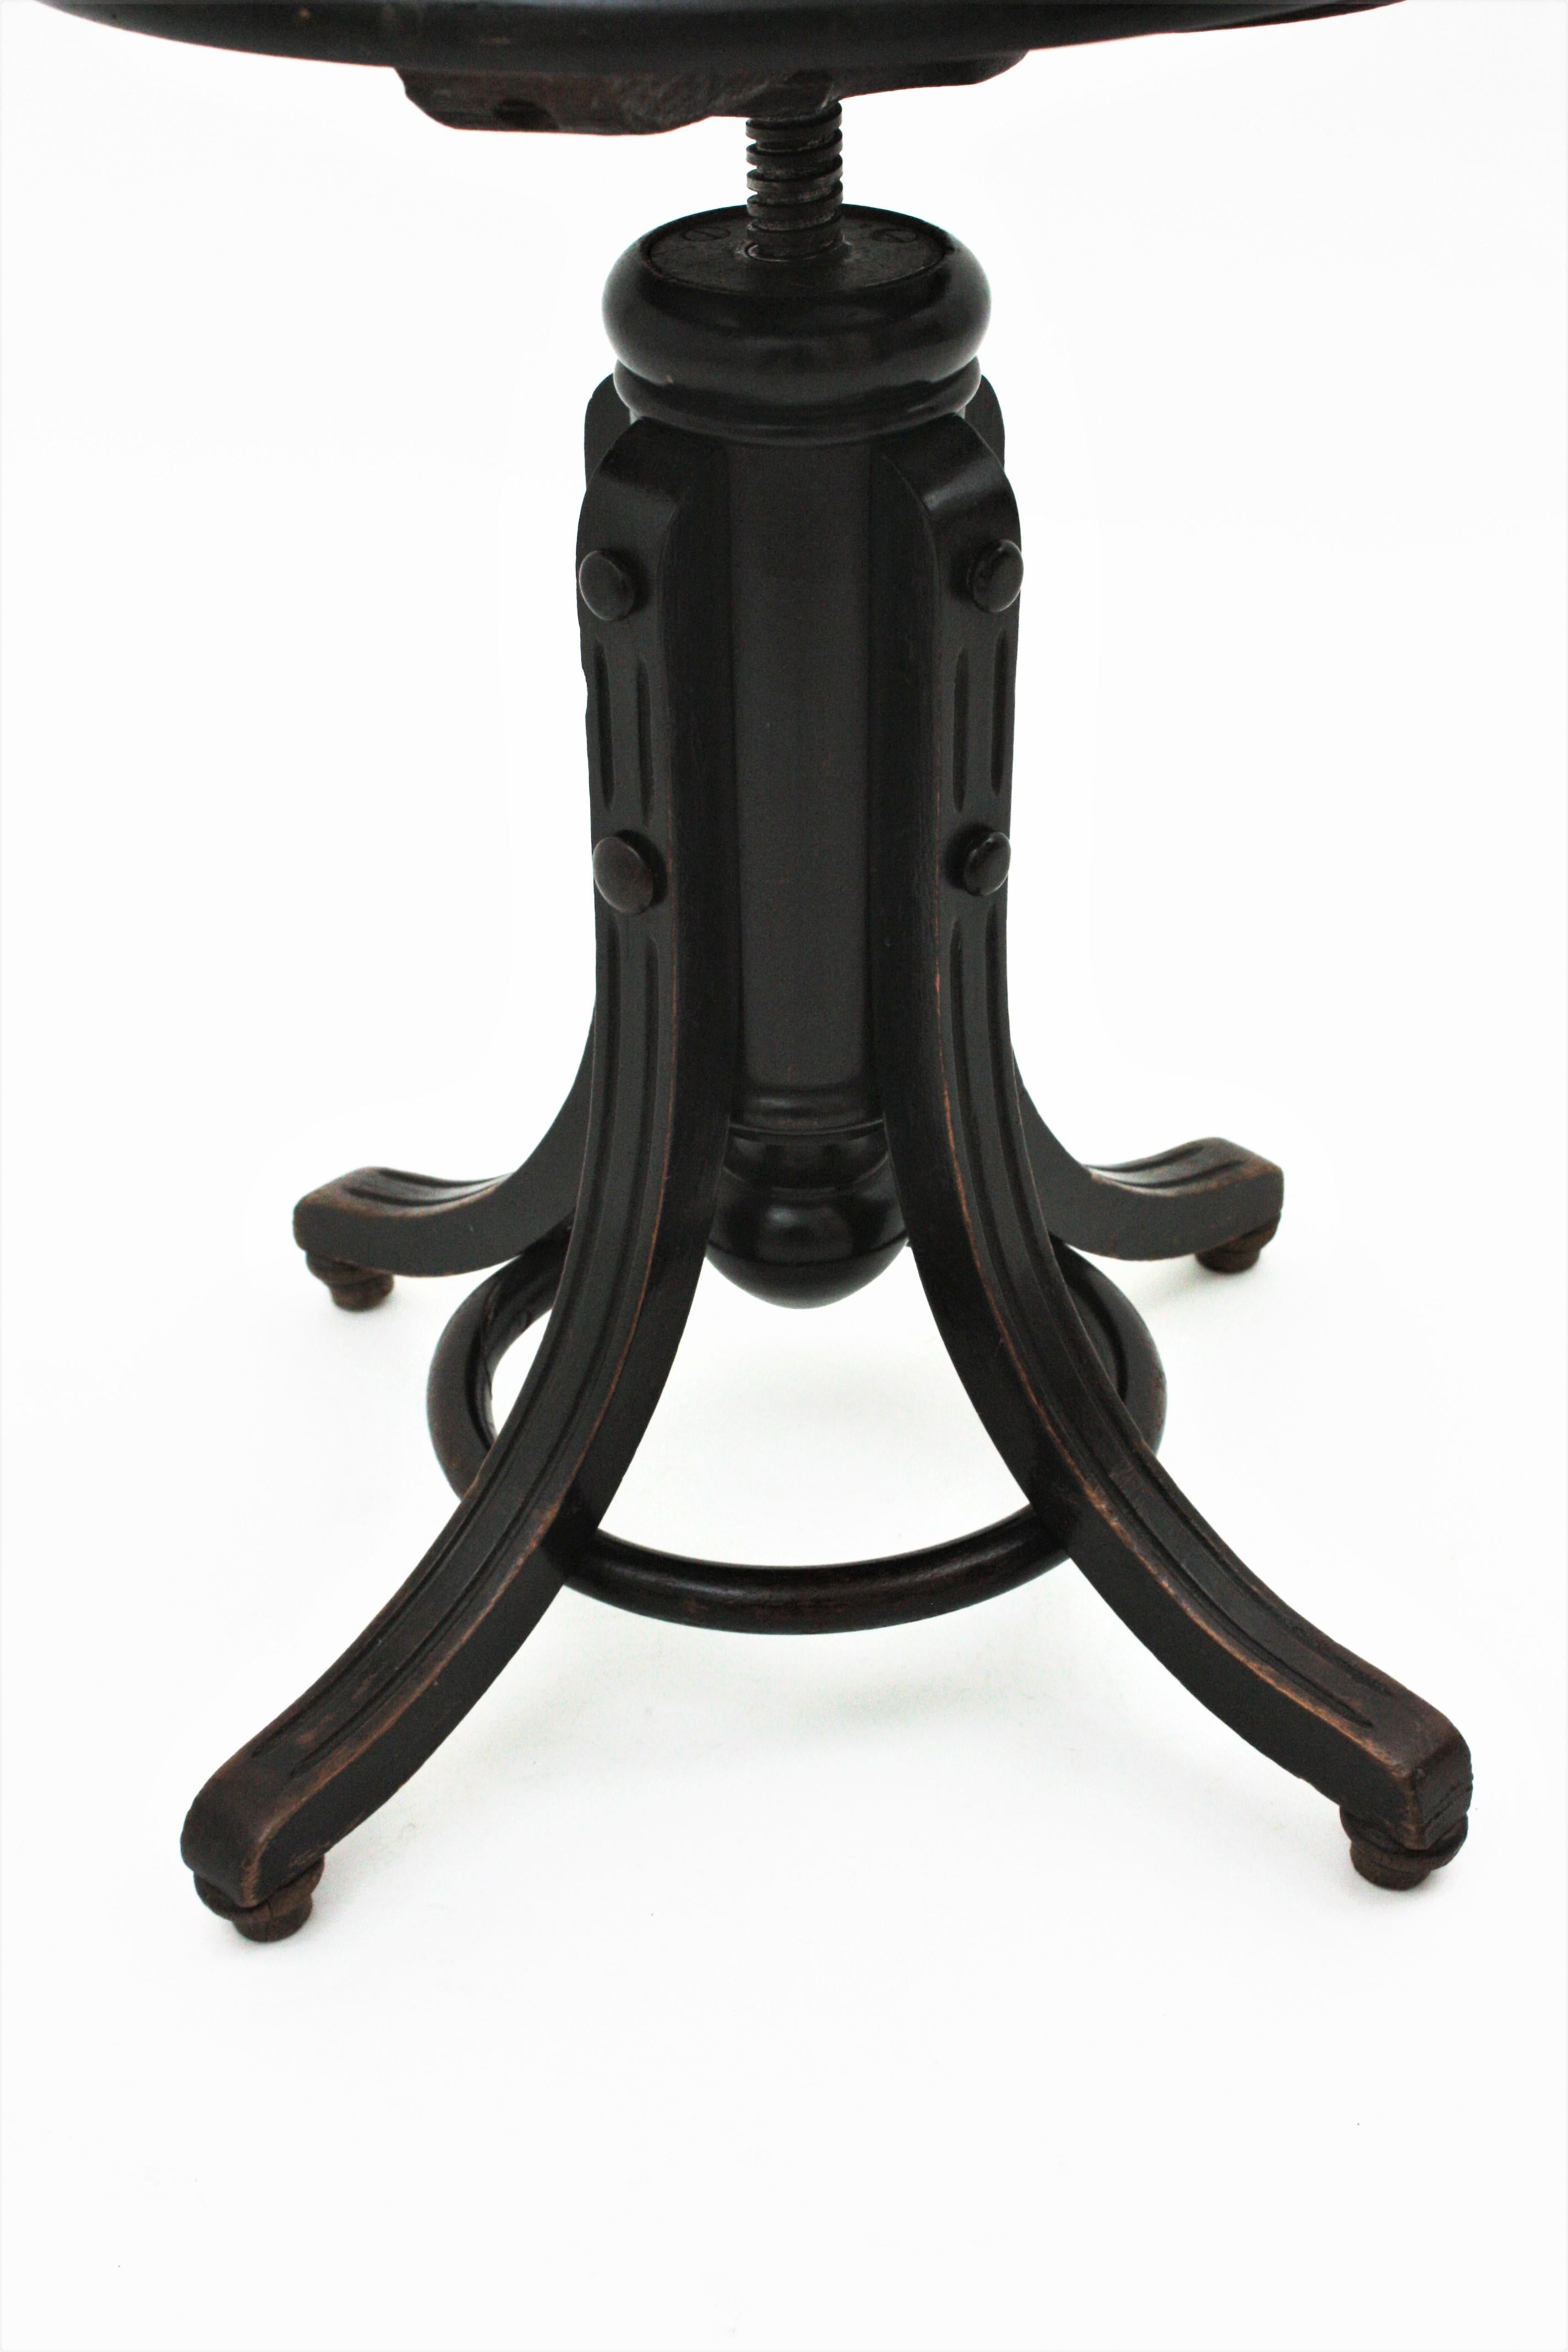 Austrian Thonet Style Revolving Stool with Cane Seat For Sale